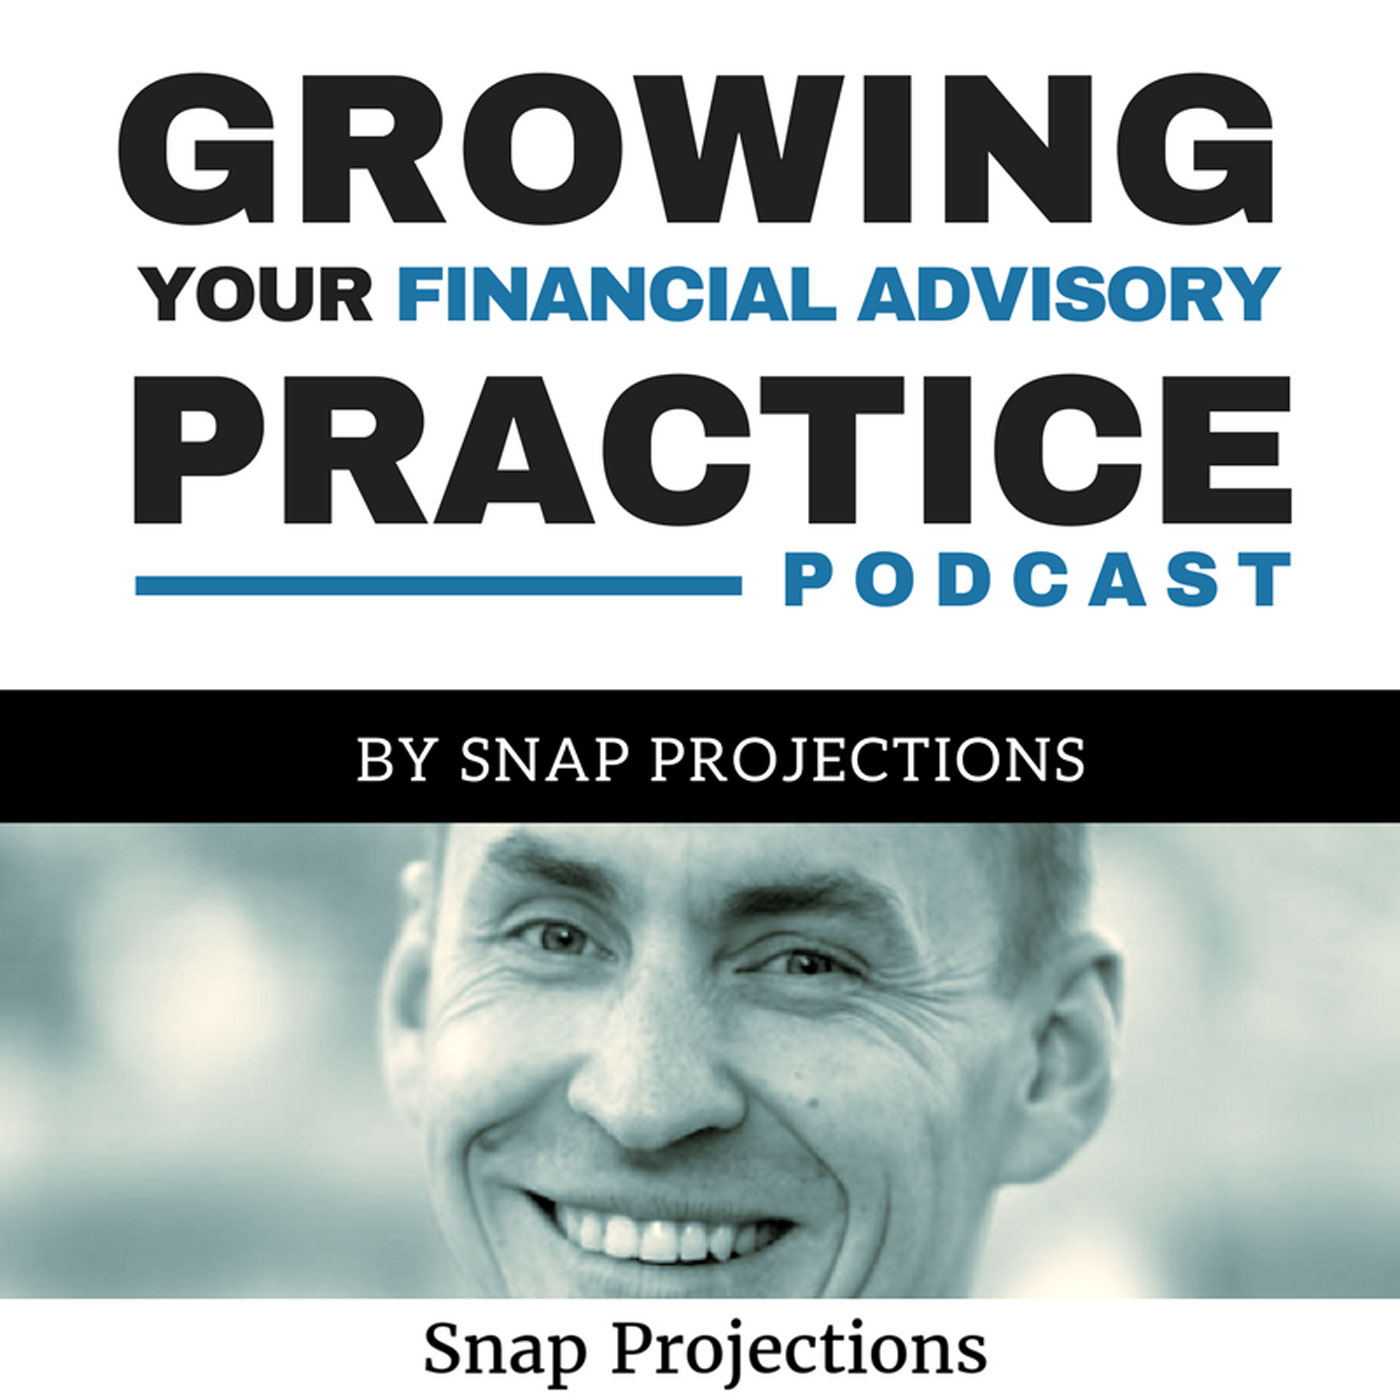 000: Welcome to Growing Your Financial Advisory Practice Podcast